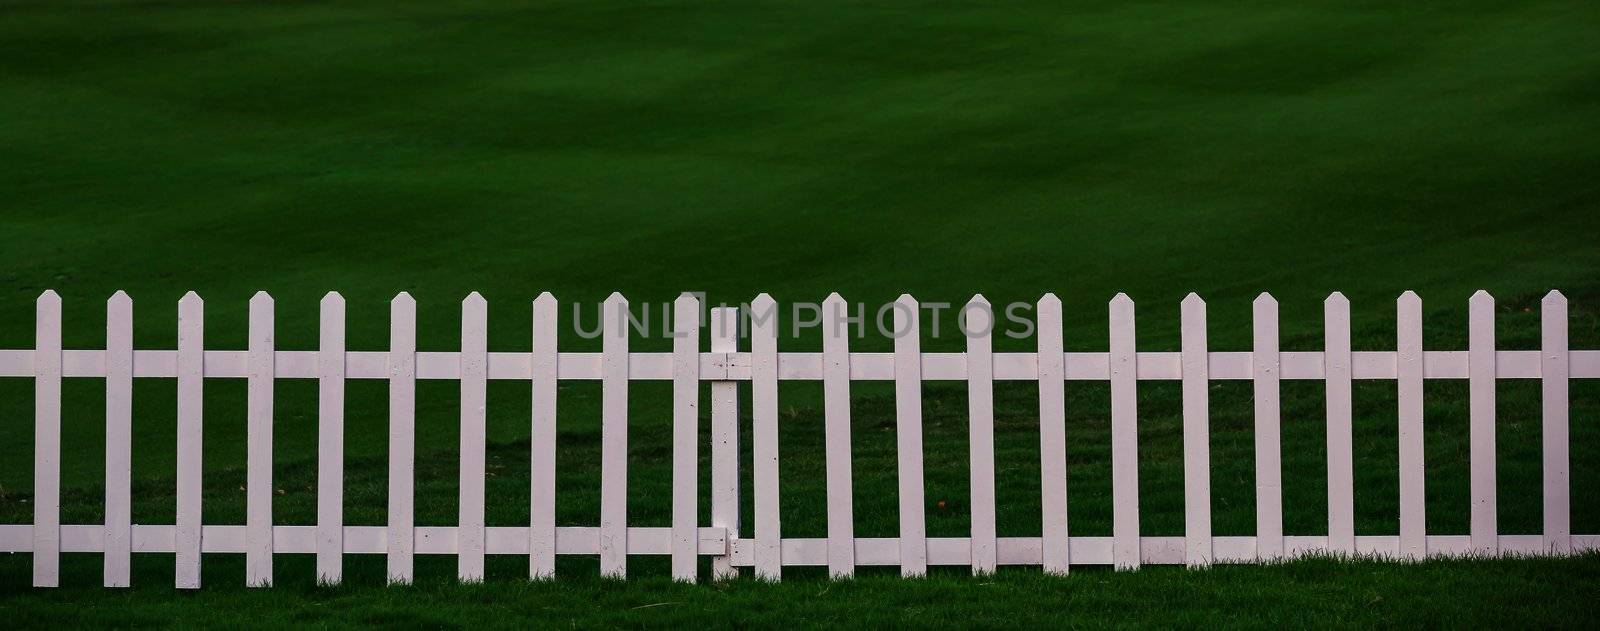 Green lawn and white wood fence